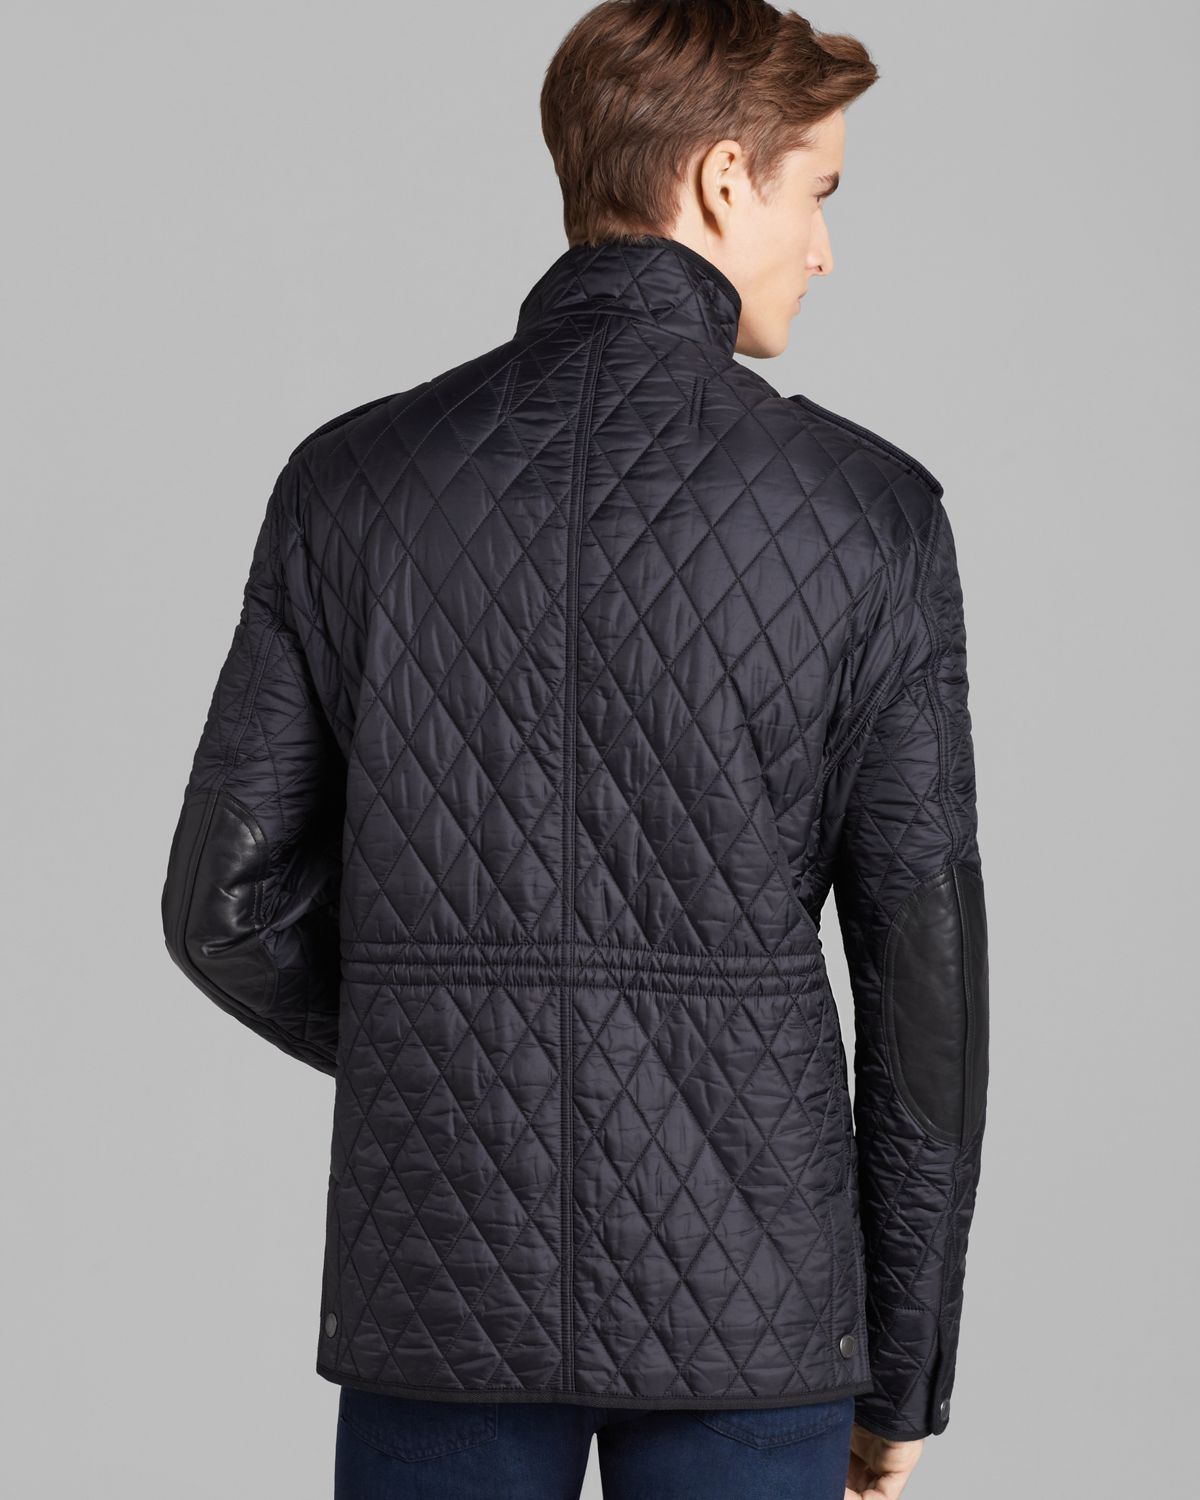 Lyst - Burberry Brit Russel Diamond Quilted Jacket in Black for Men